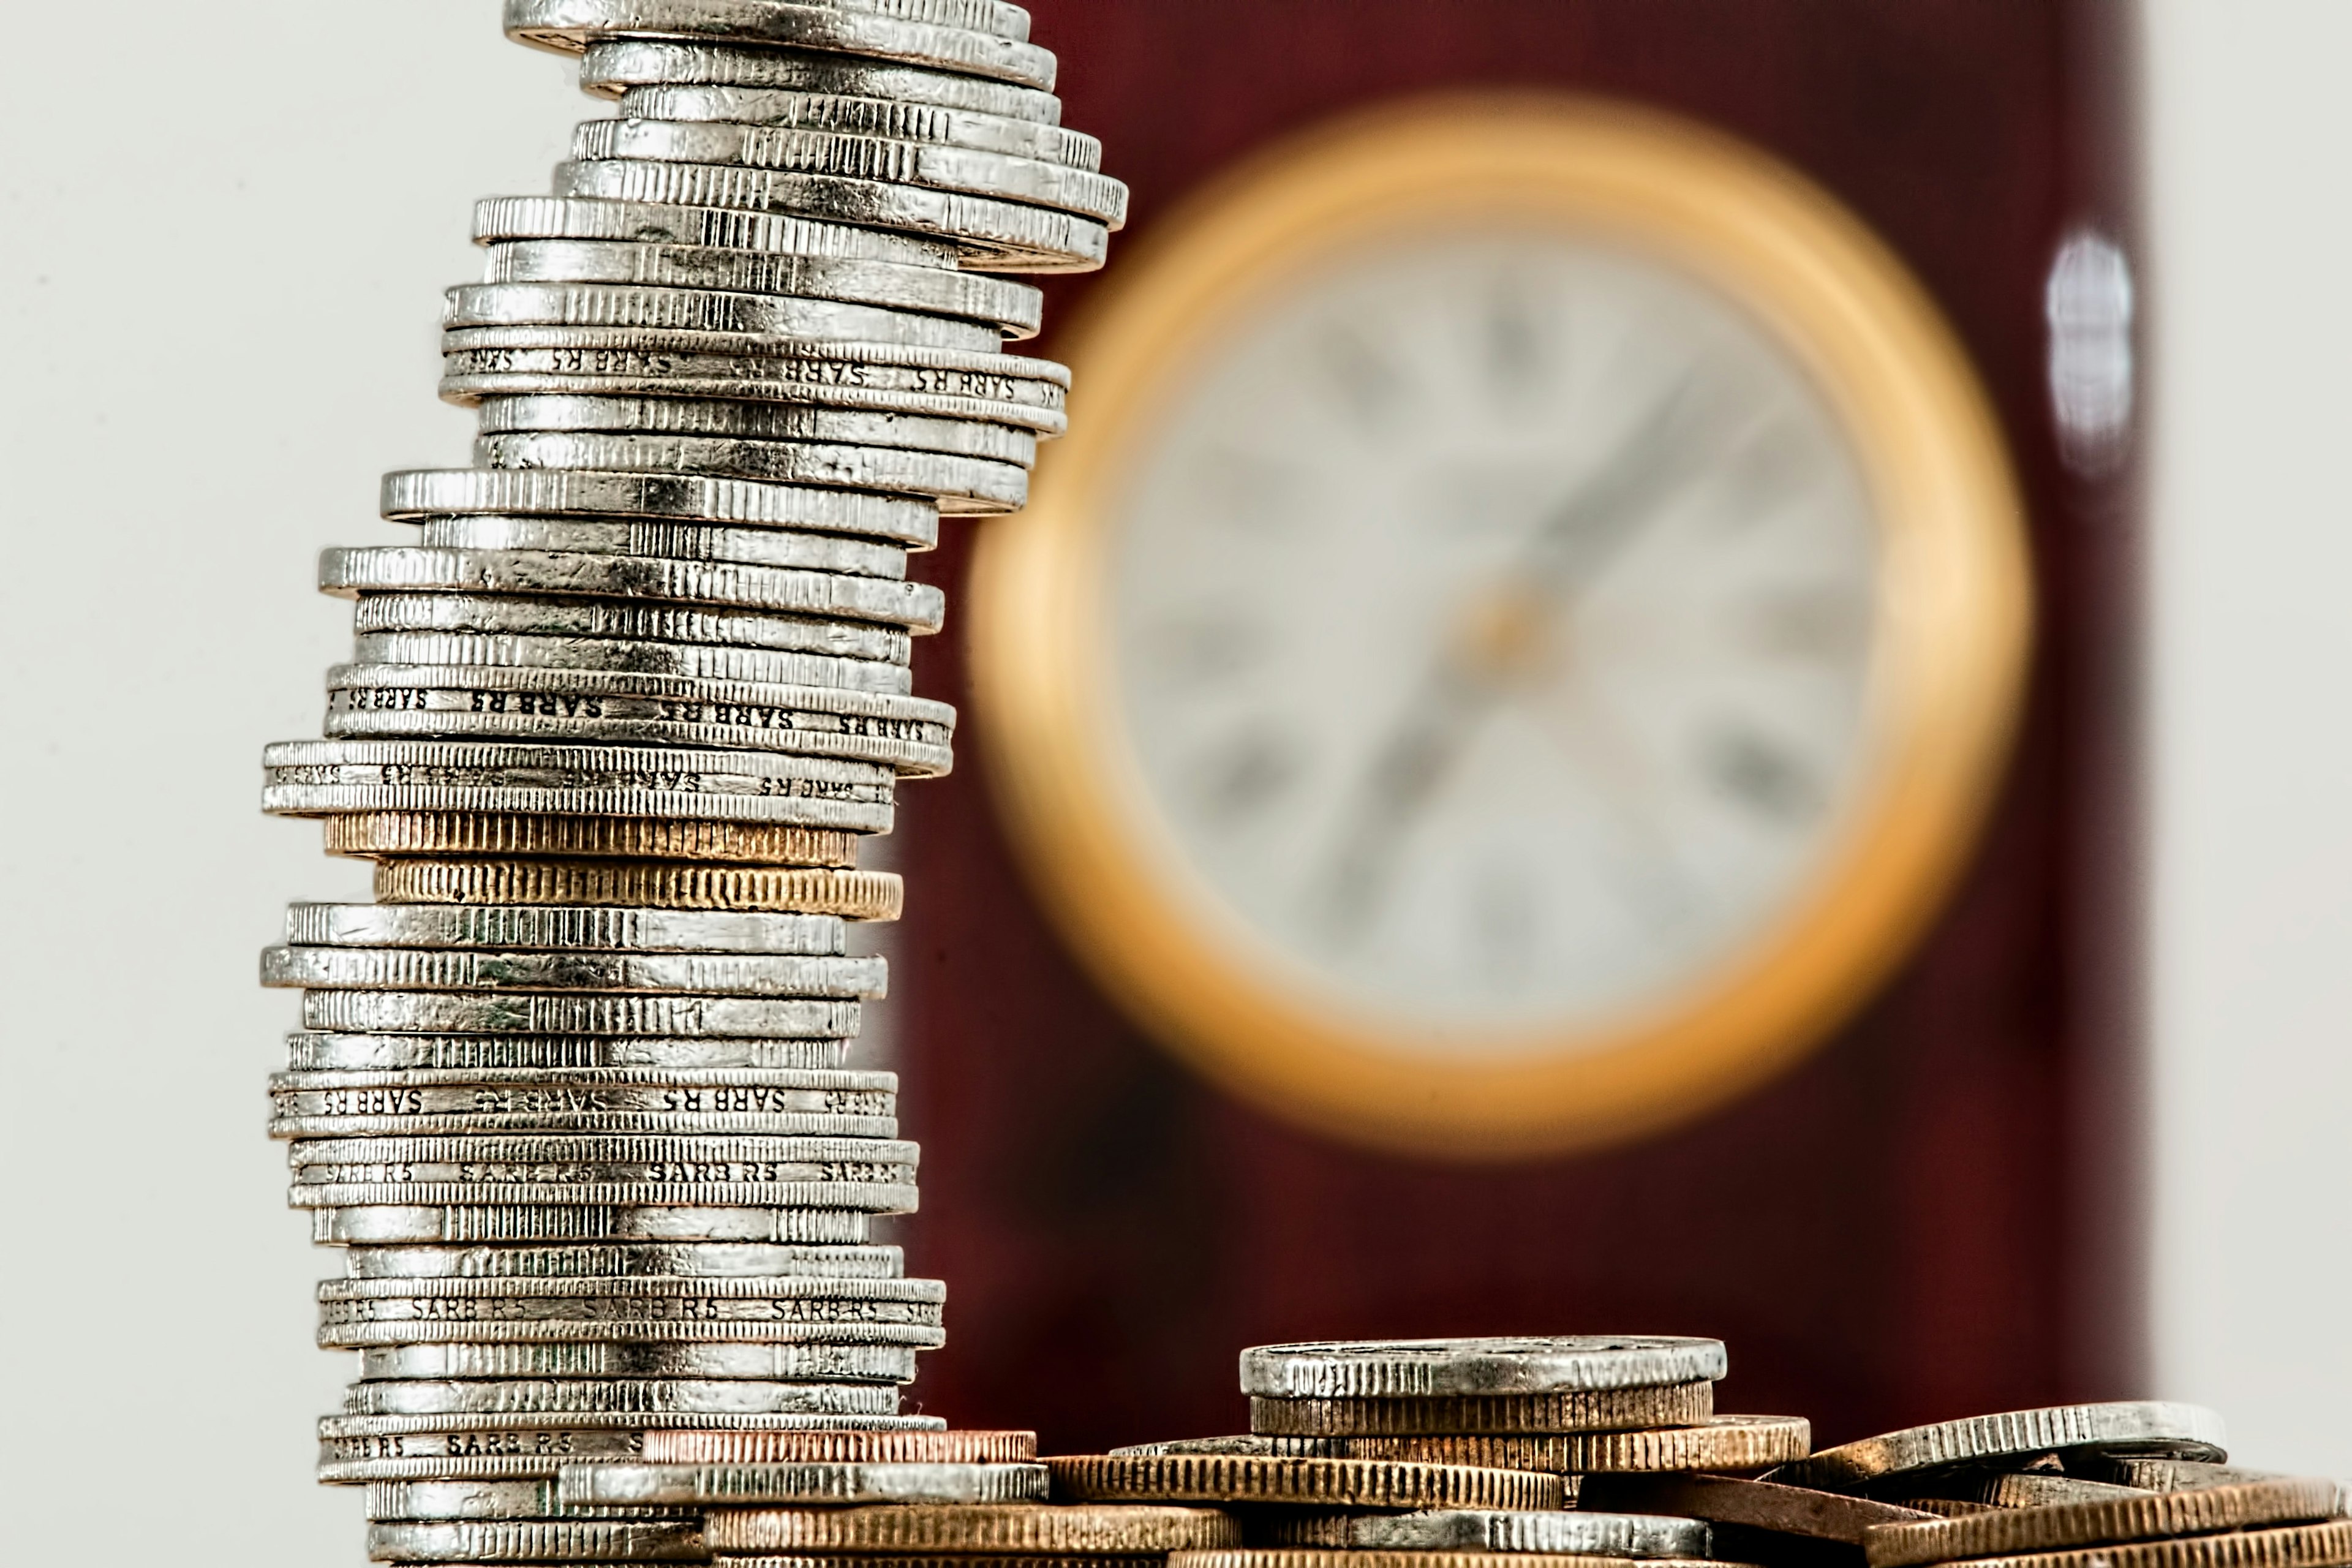 A stack of coins in the foreground with an out-of-focus clock in the background representing "time is money"